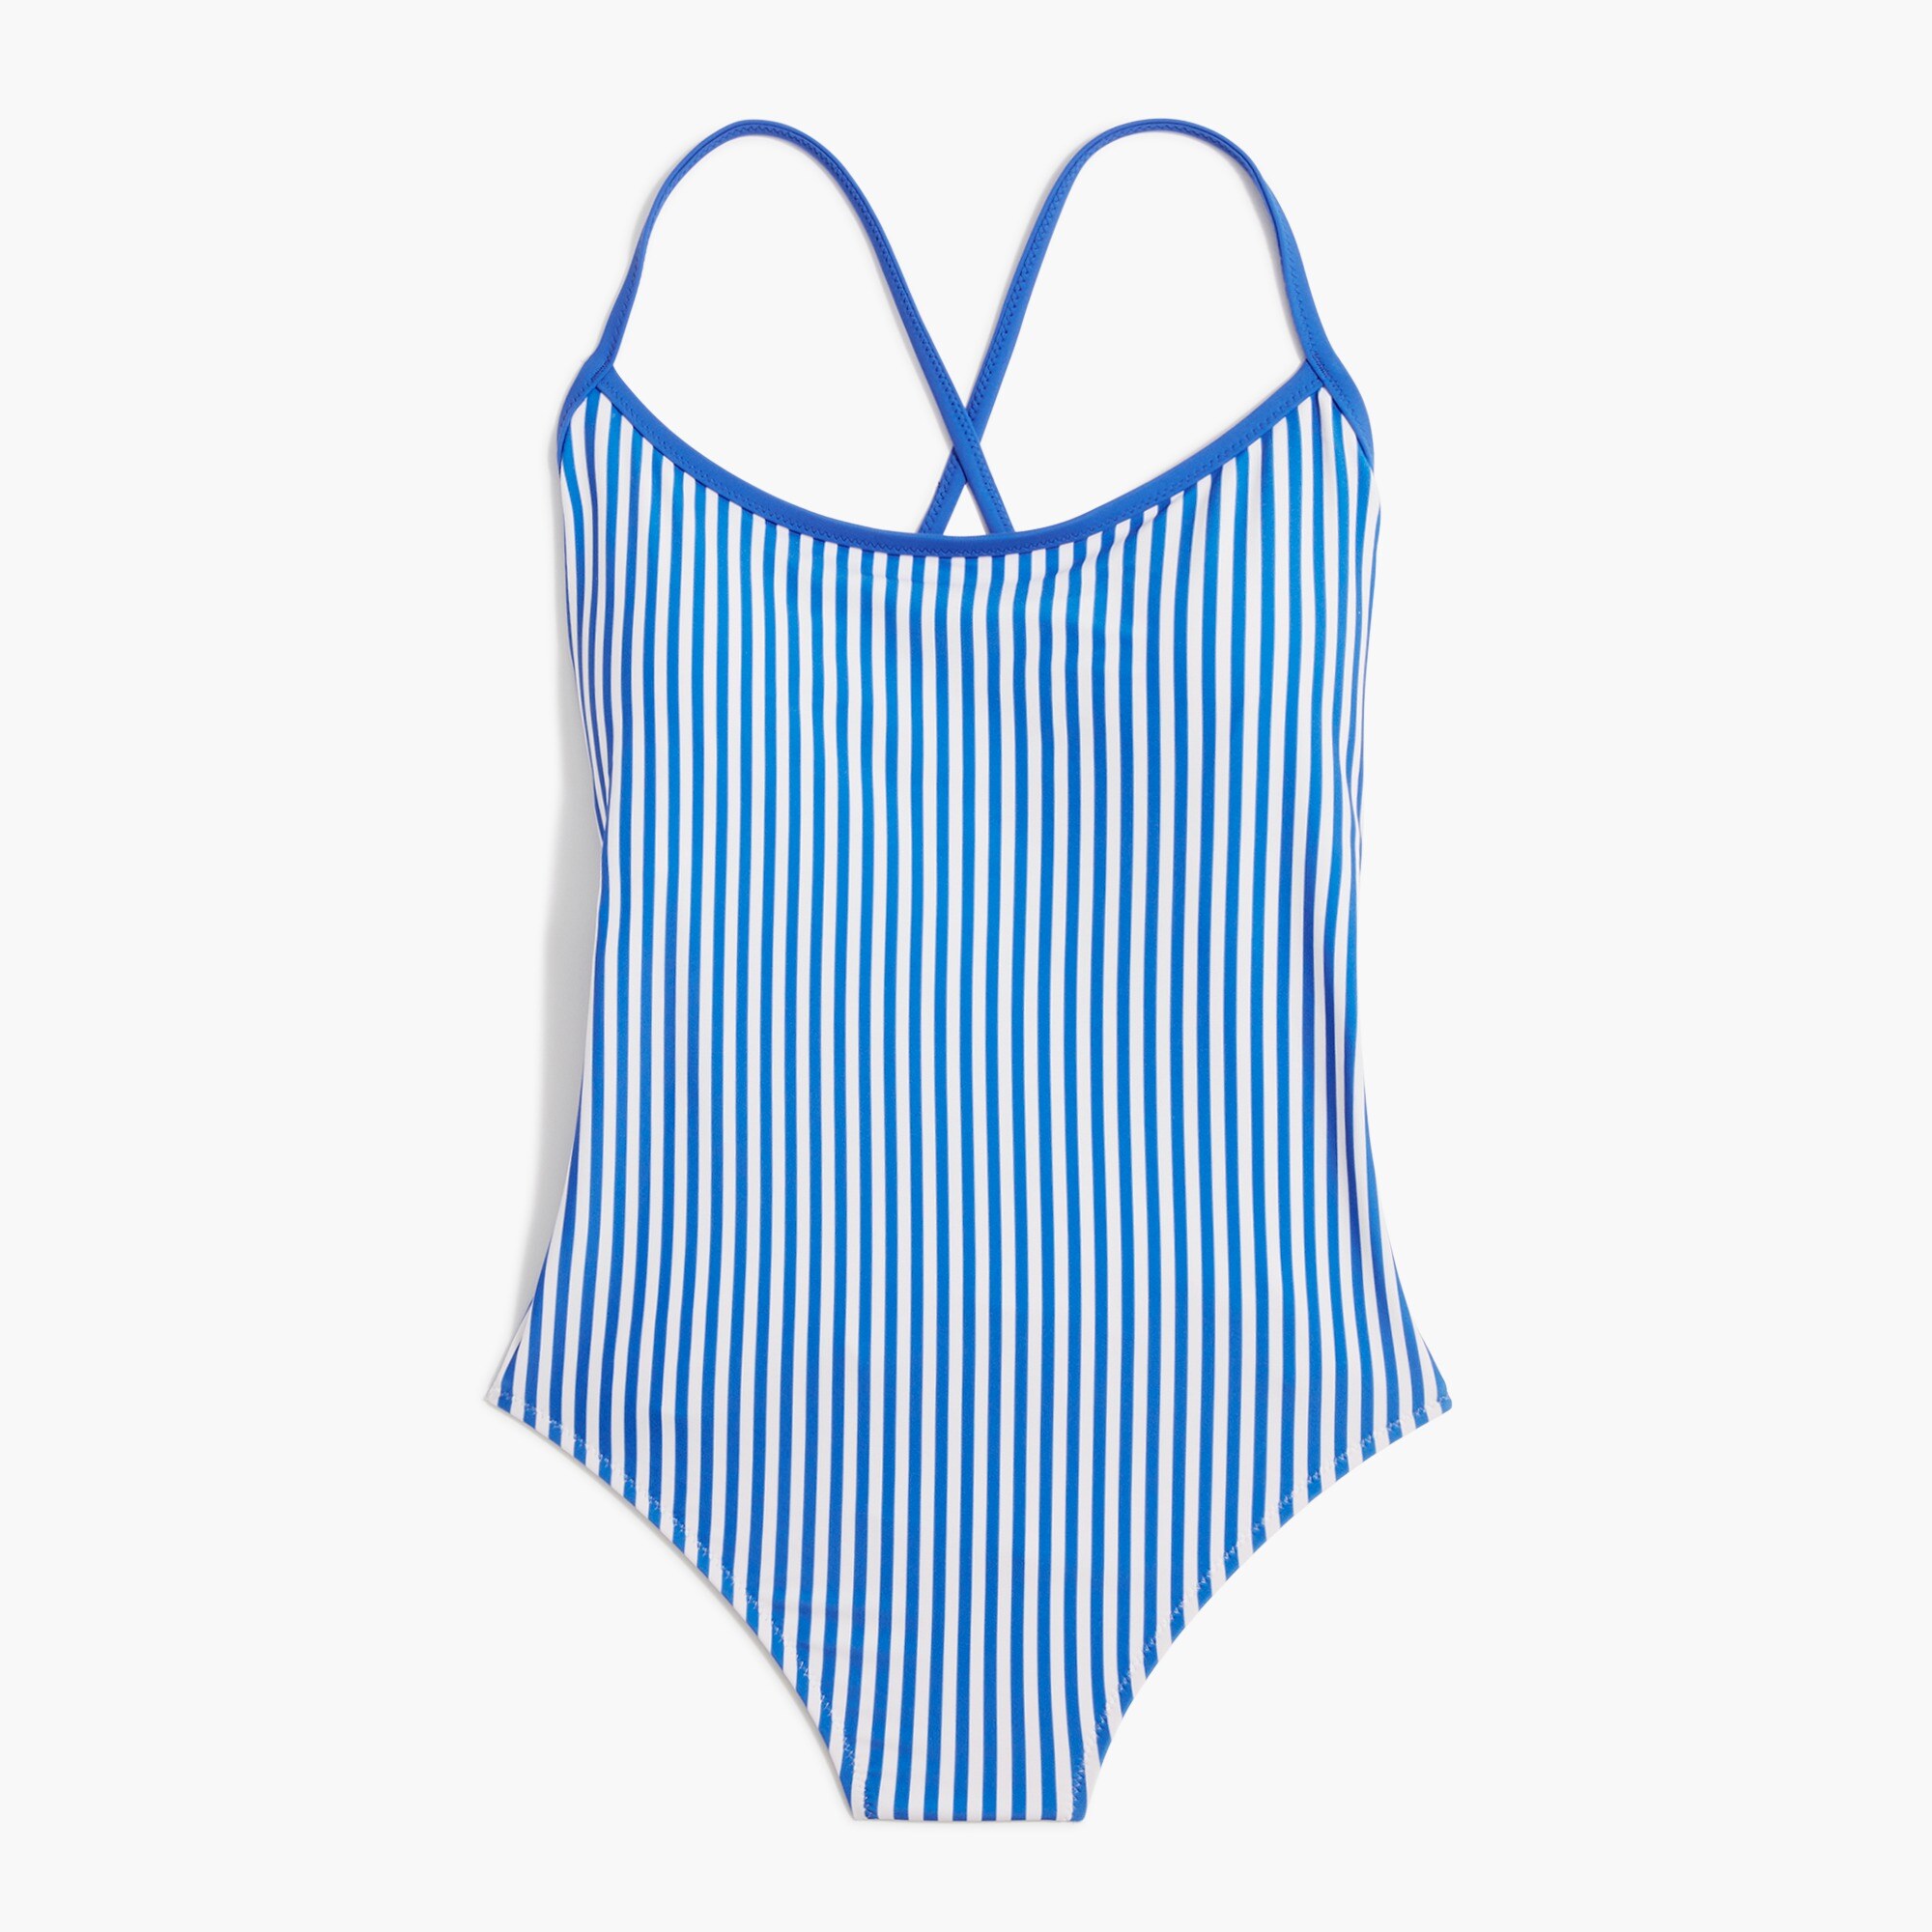 womens Striped one-piece swimsuit with crisscross back